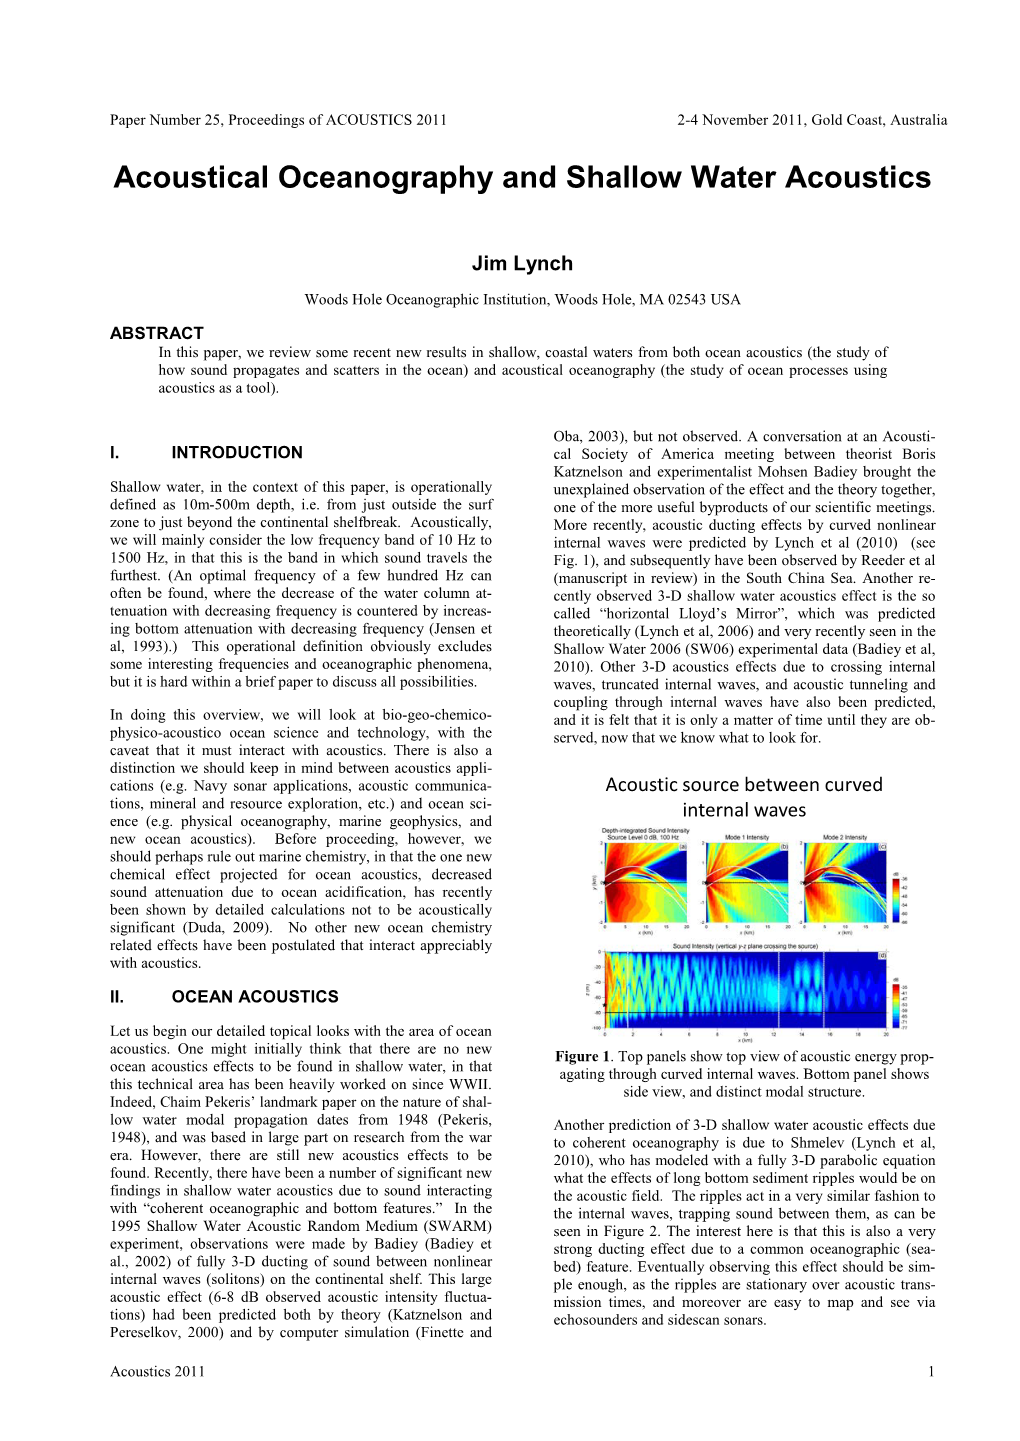 Acoustical Oceanography and Shallow Water Acoustics